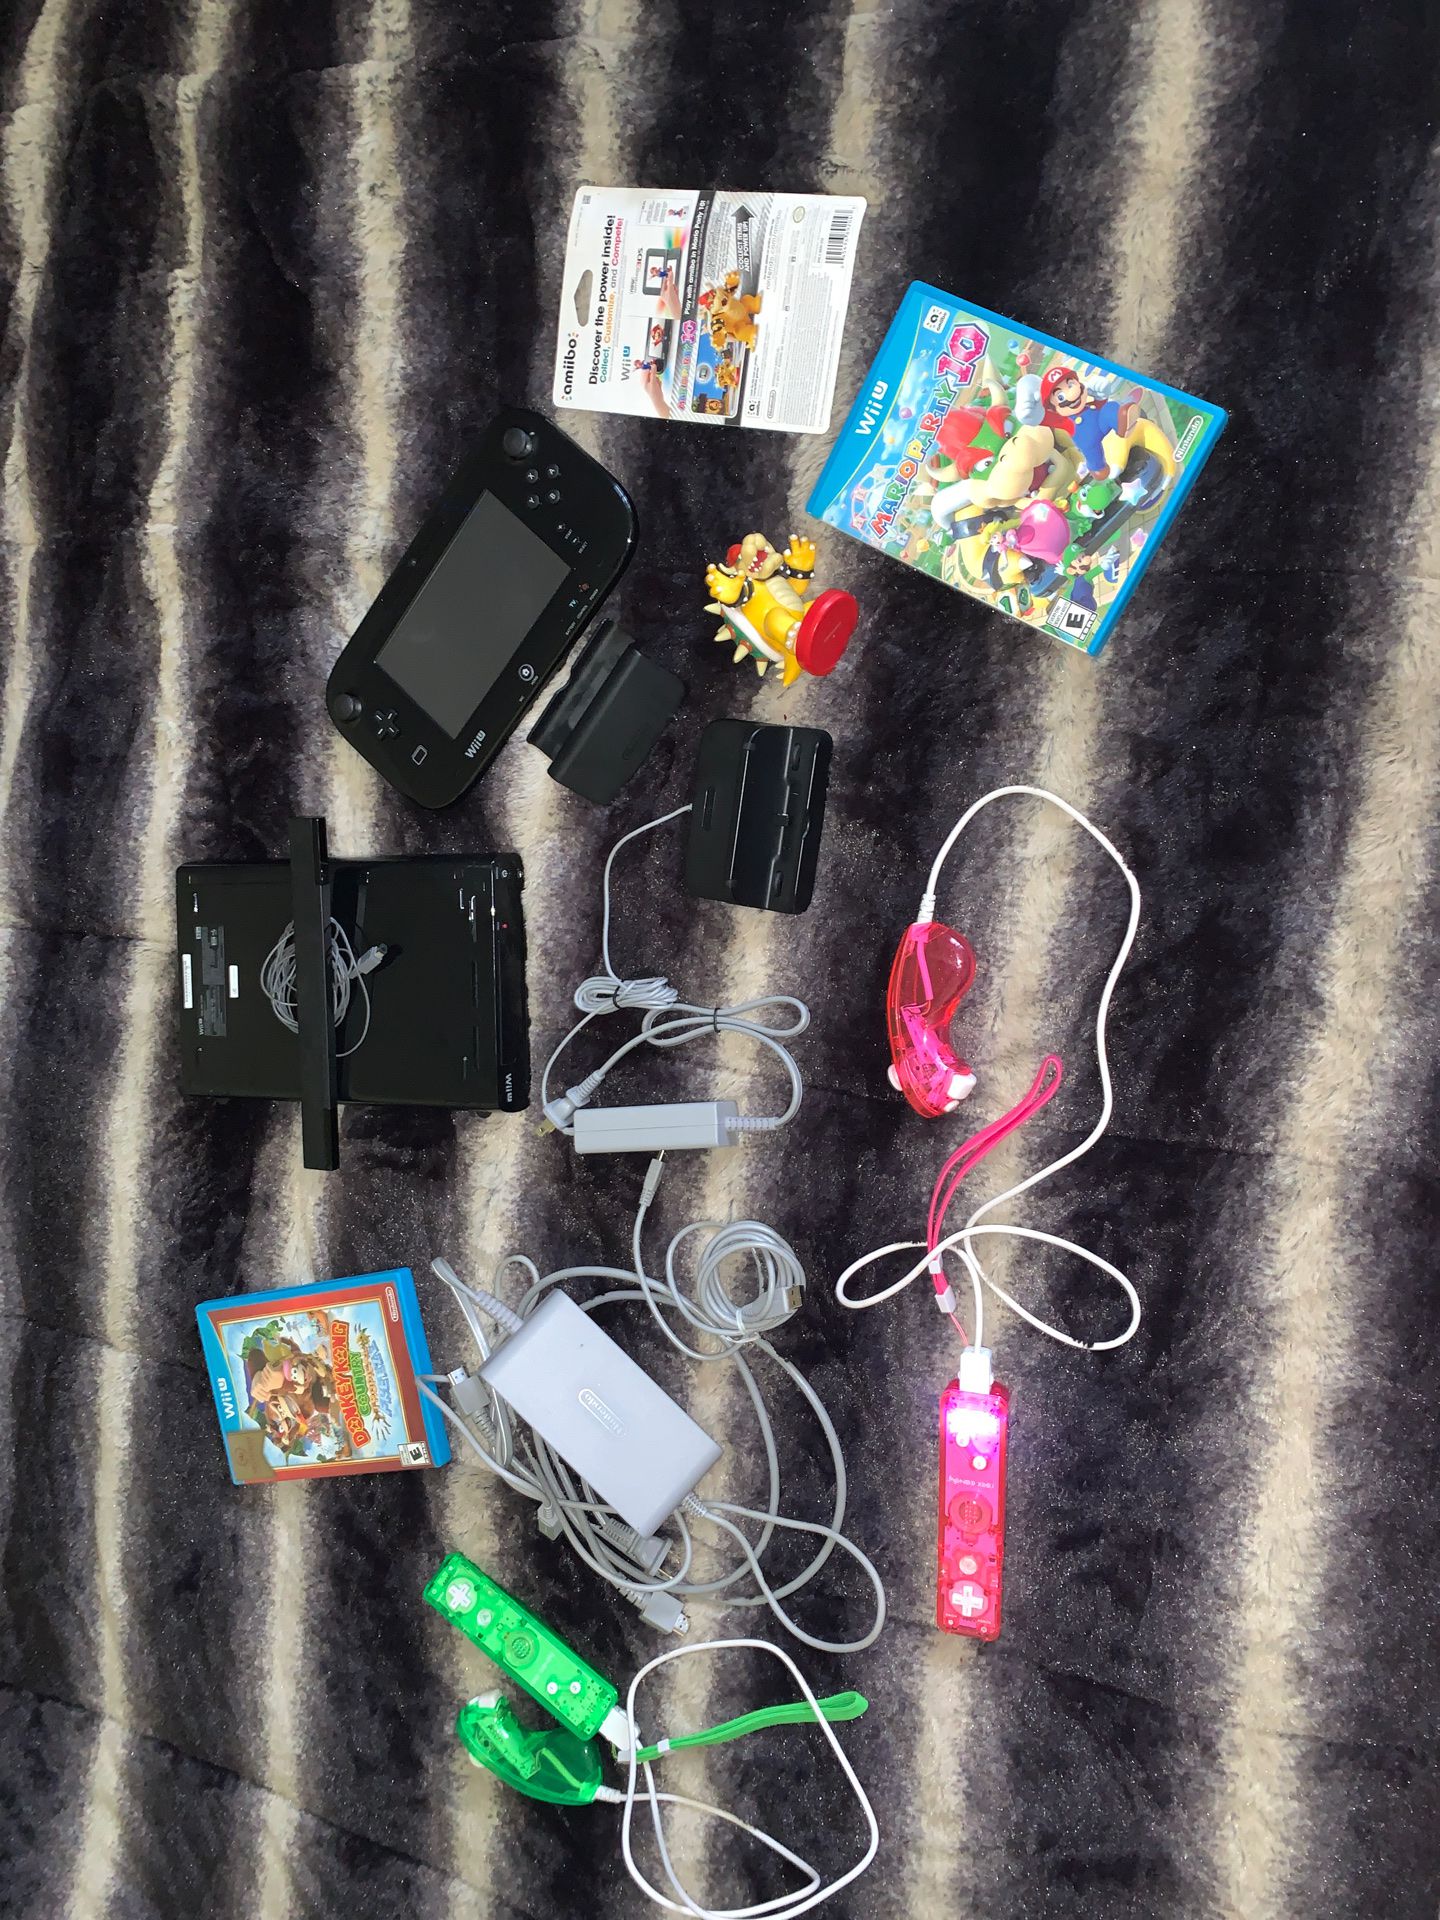 Wii U with remotes, games Nintendo accessories